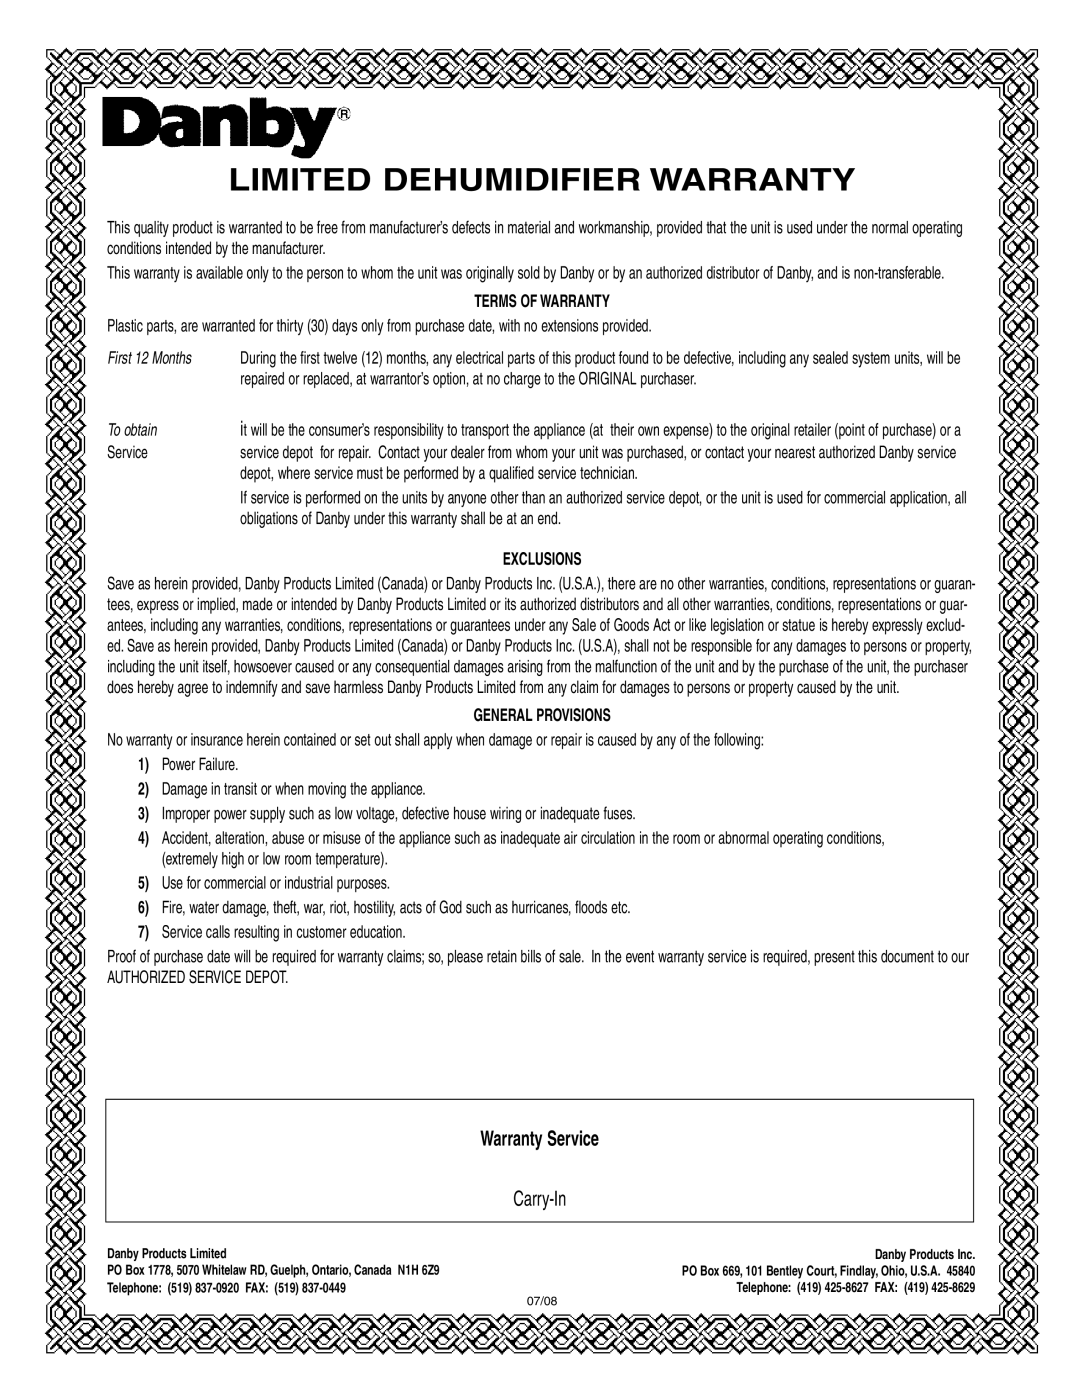 Danby DDR2509EE Limited Dehumidifier Warranty, Warranty Service, Terms Of Warranty, First 12 Months, To obtain, Exclusions 